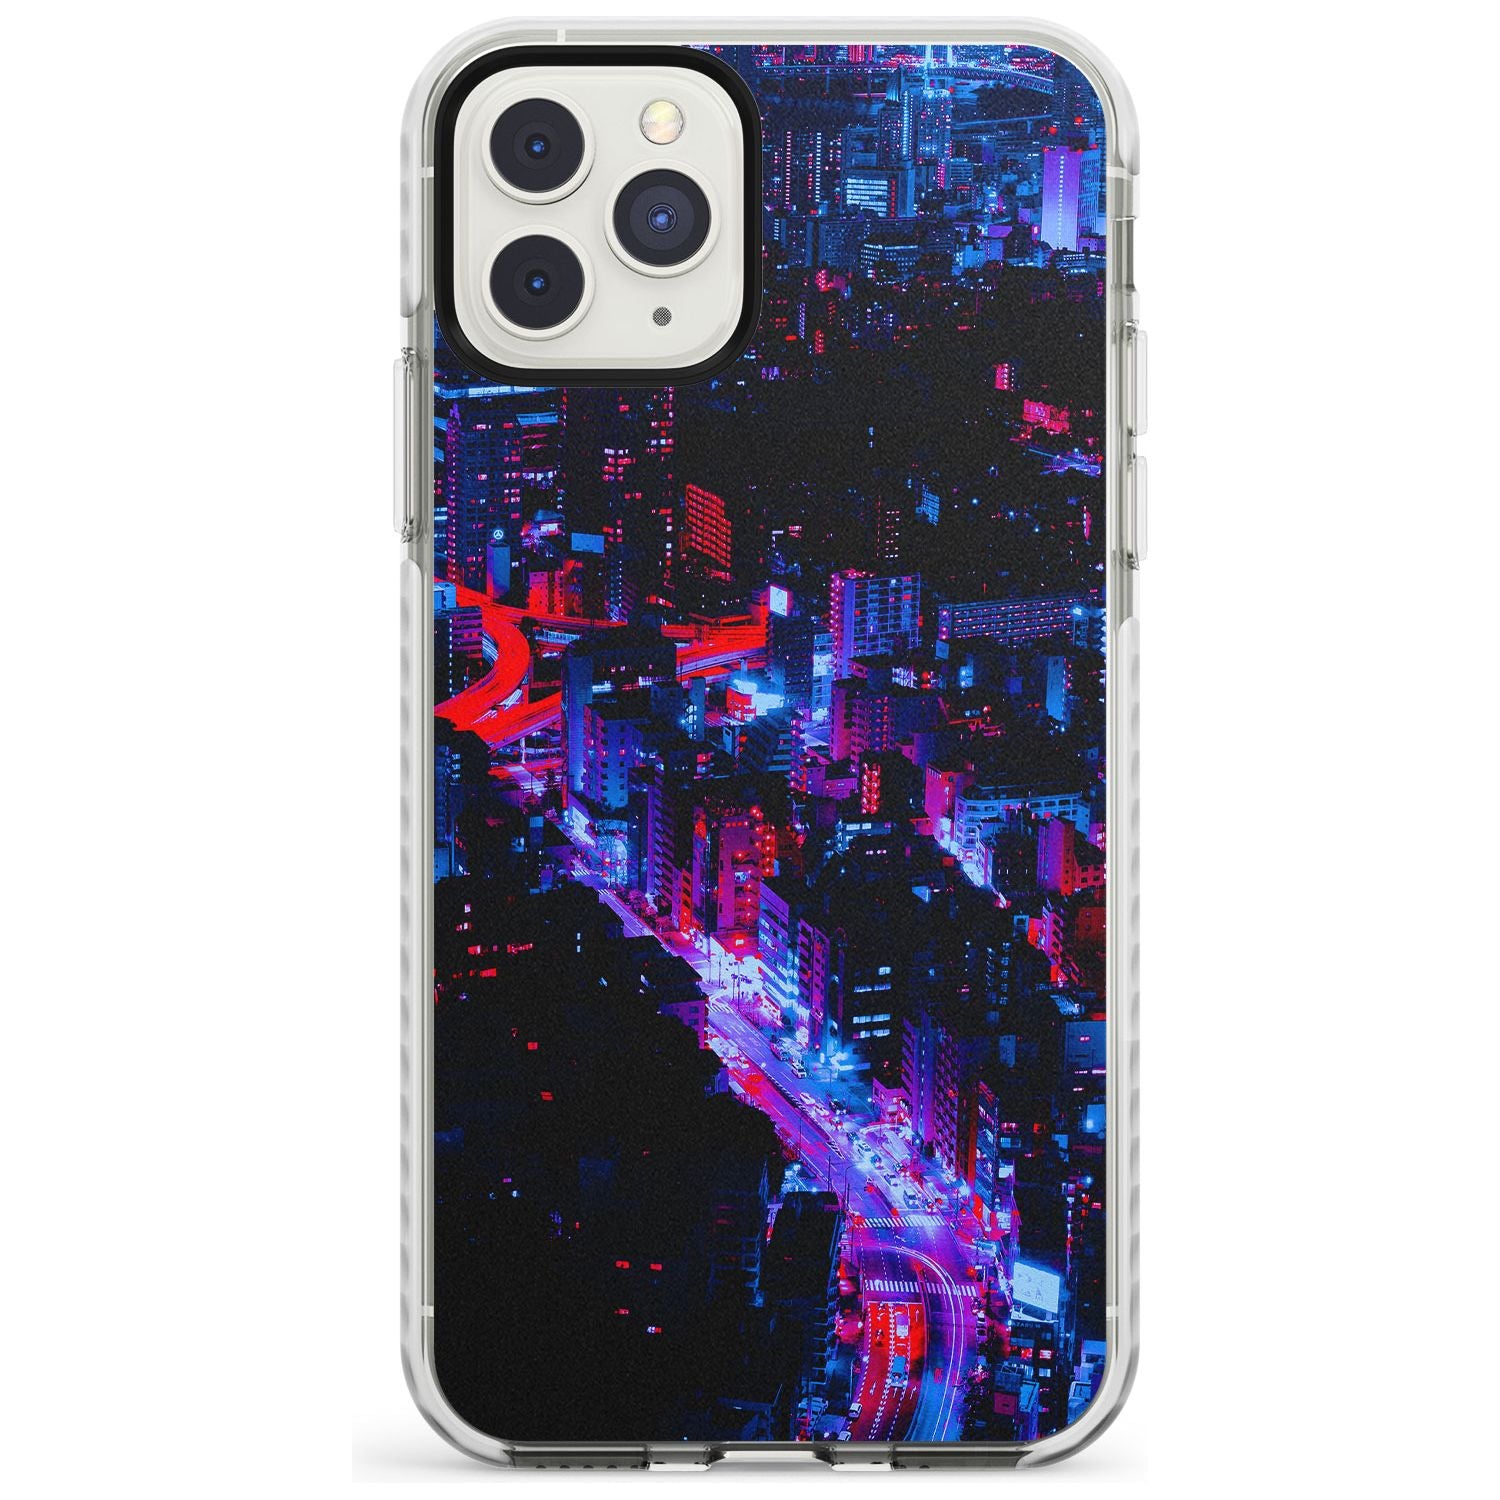 Arial City View - Neon Cities Photographs Impact Phone Case for iPhone 11 Pro Max